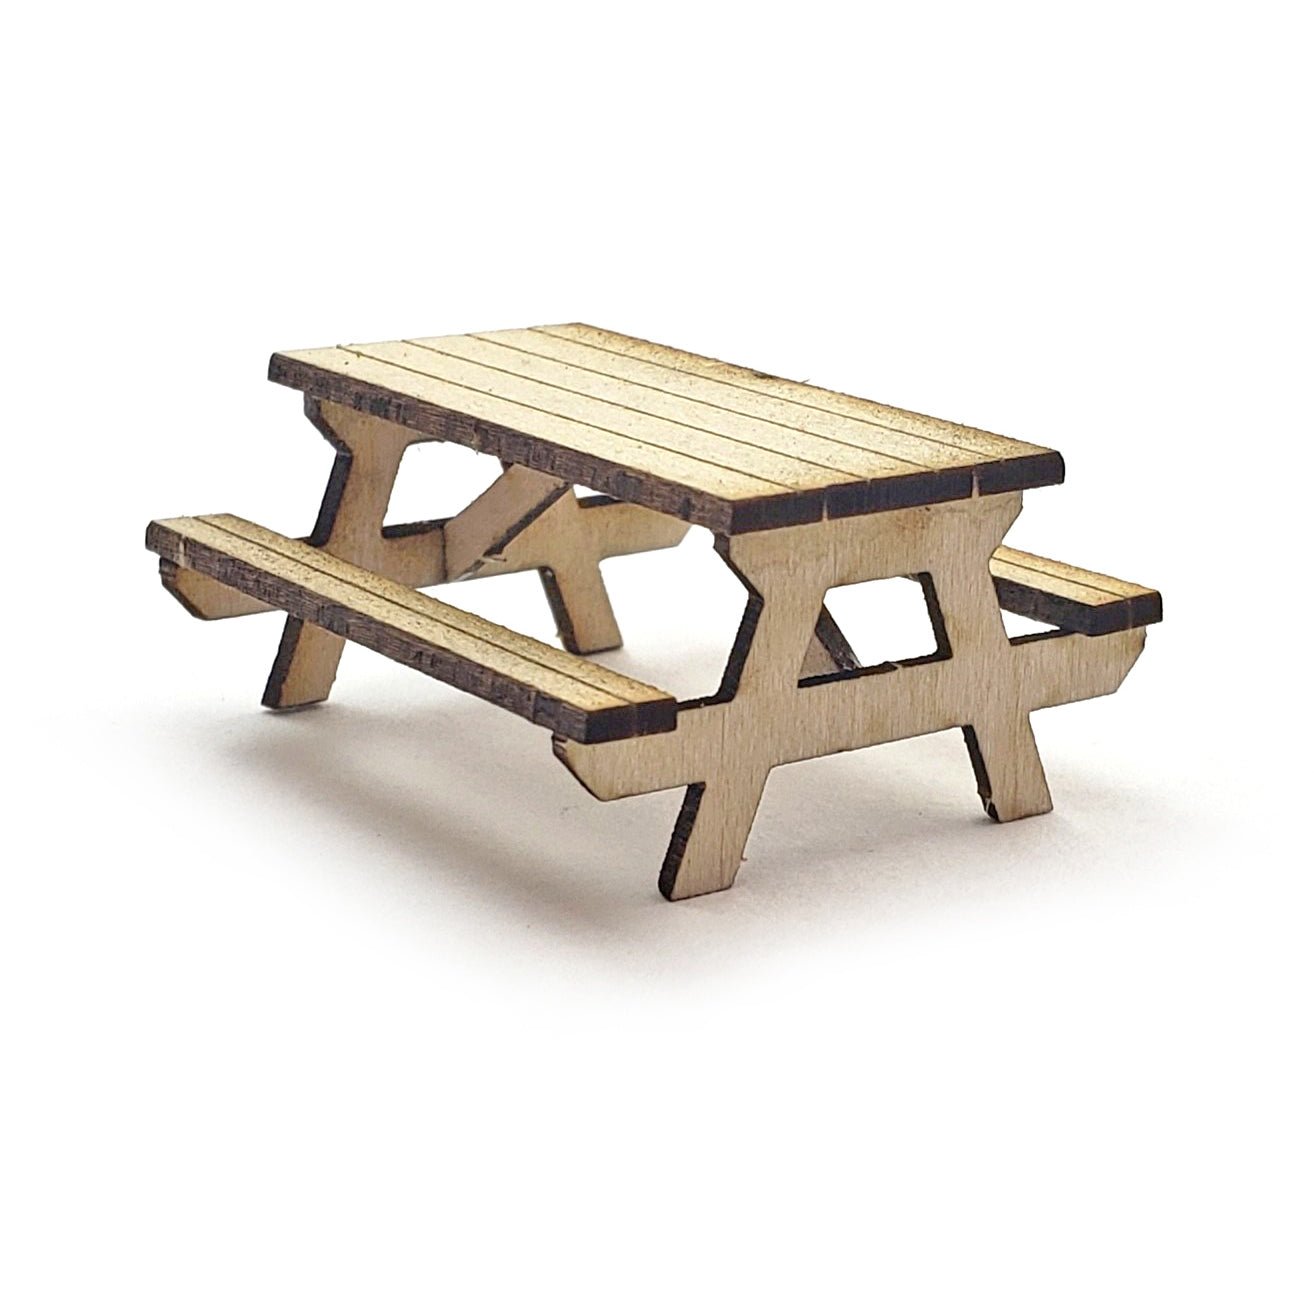 Picnic Table, HO Scale, By Scientific